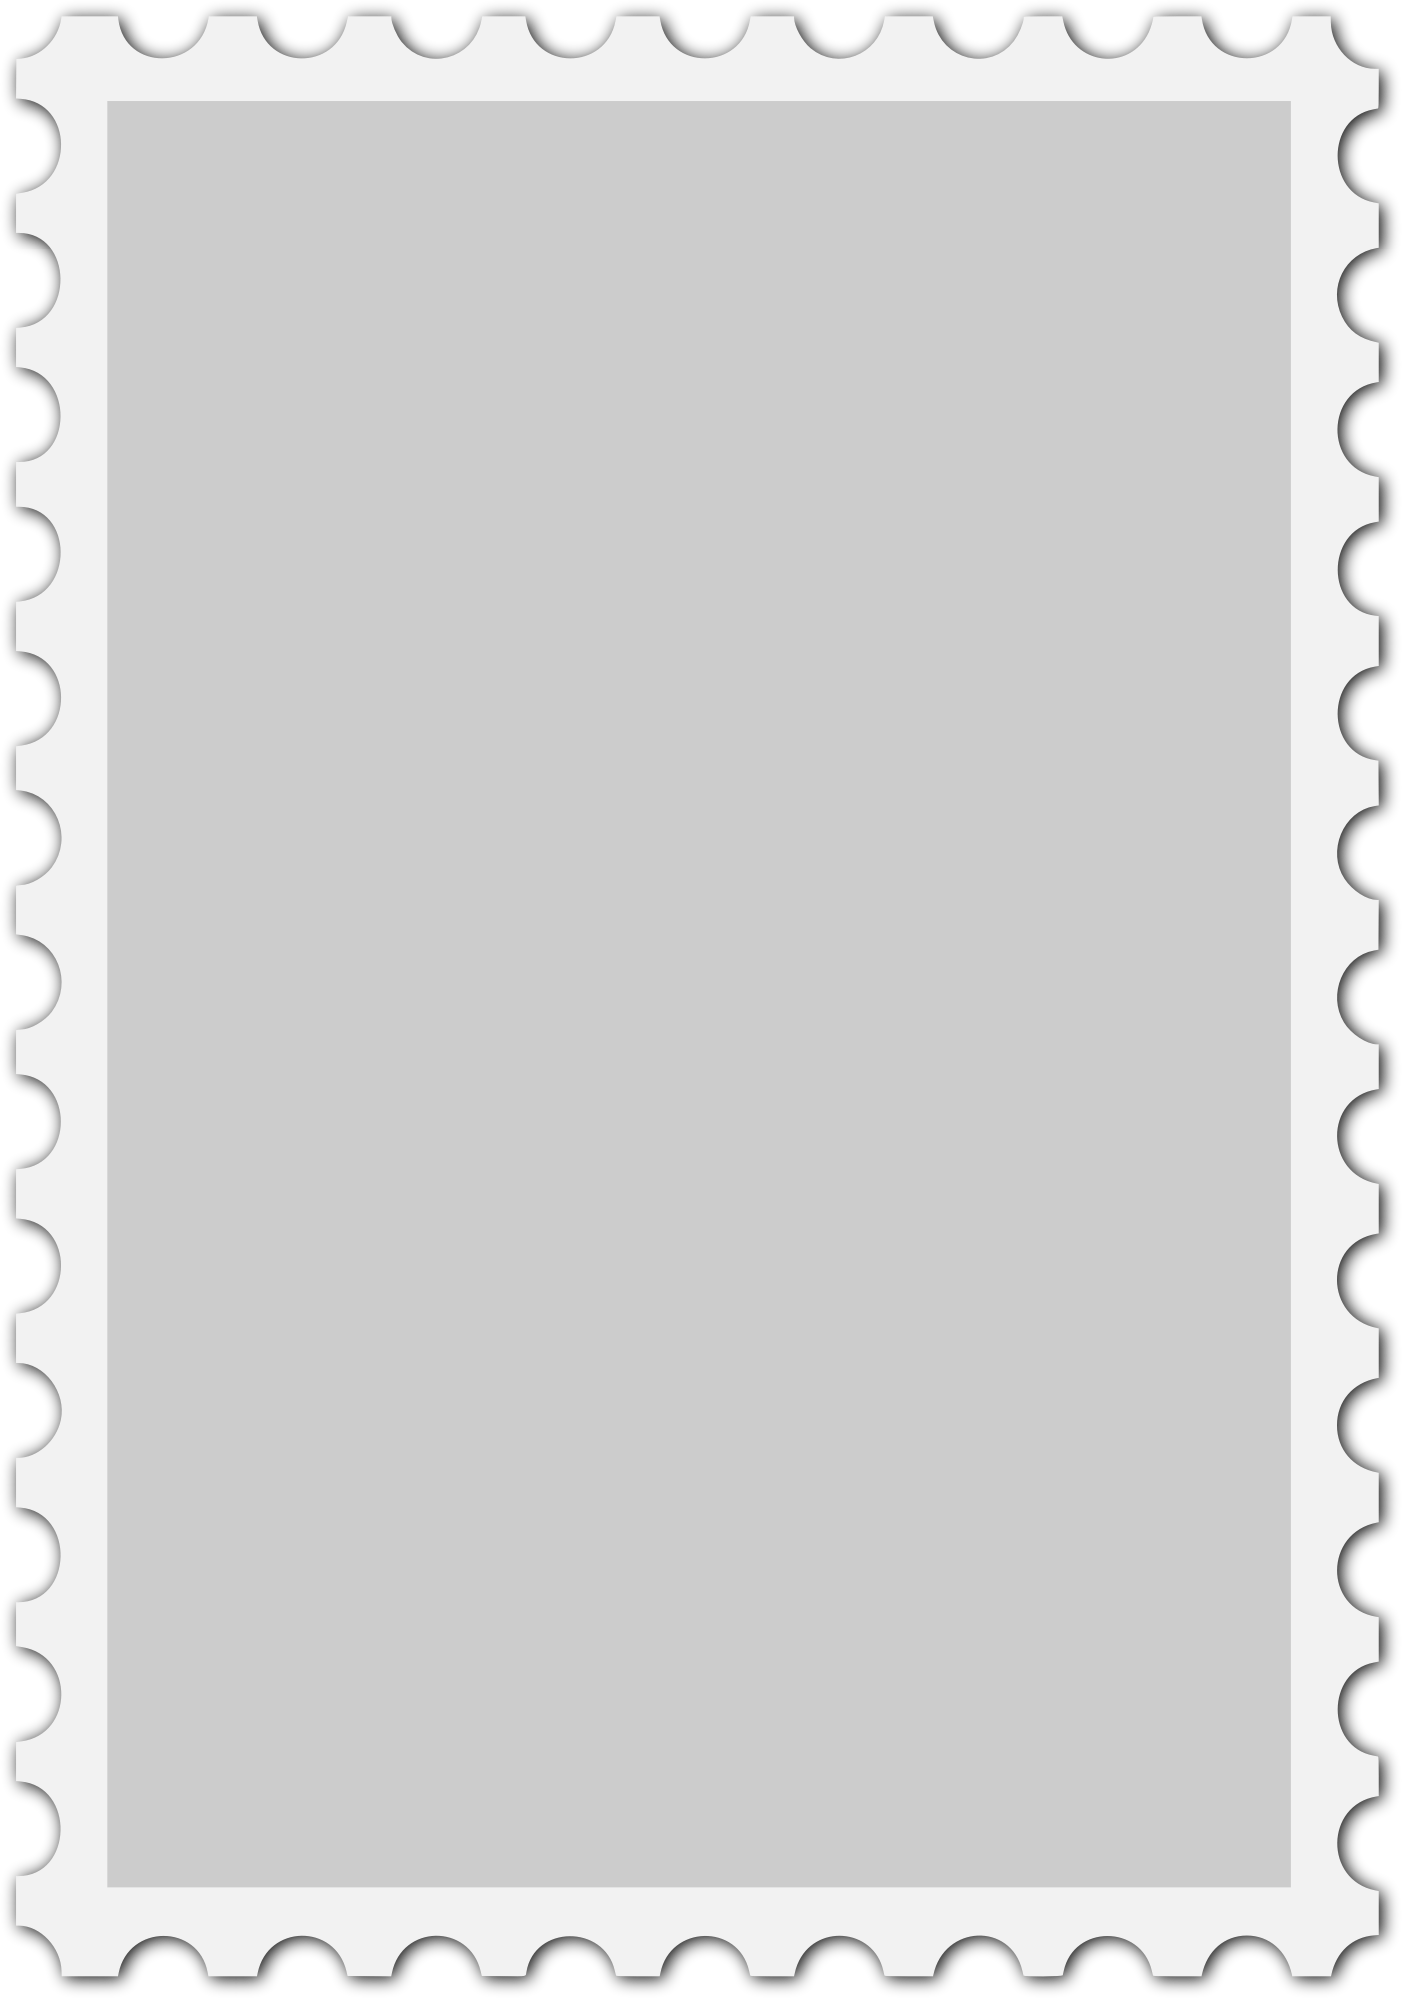 Stamp blank template free printable papercraft templates